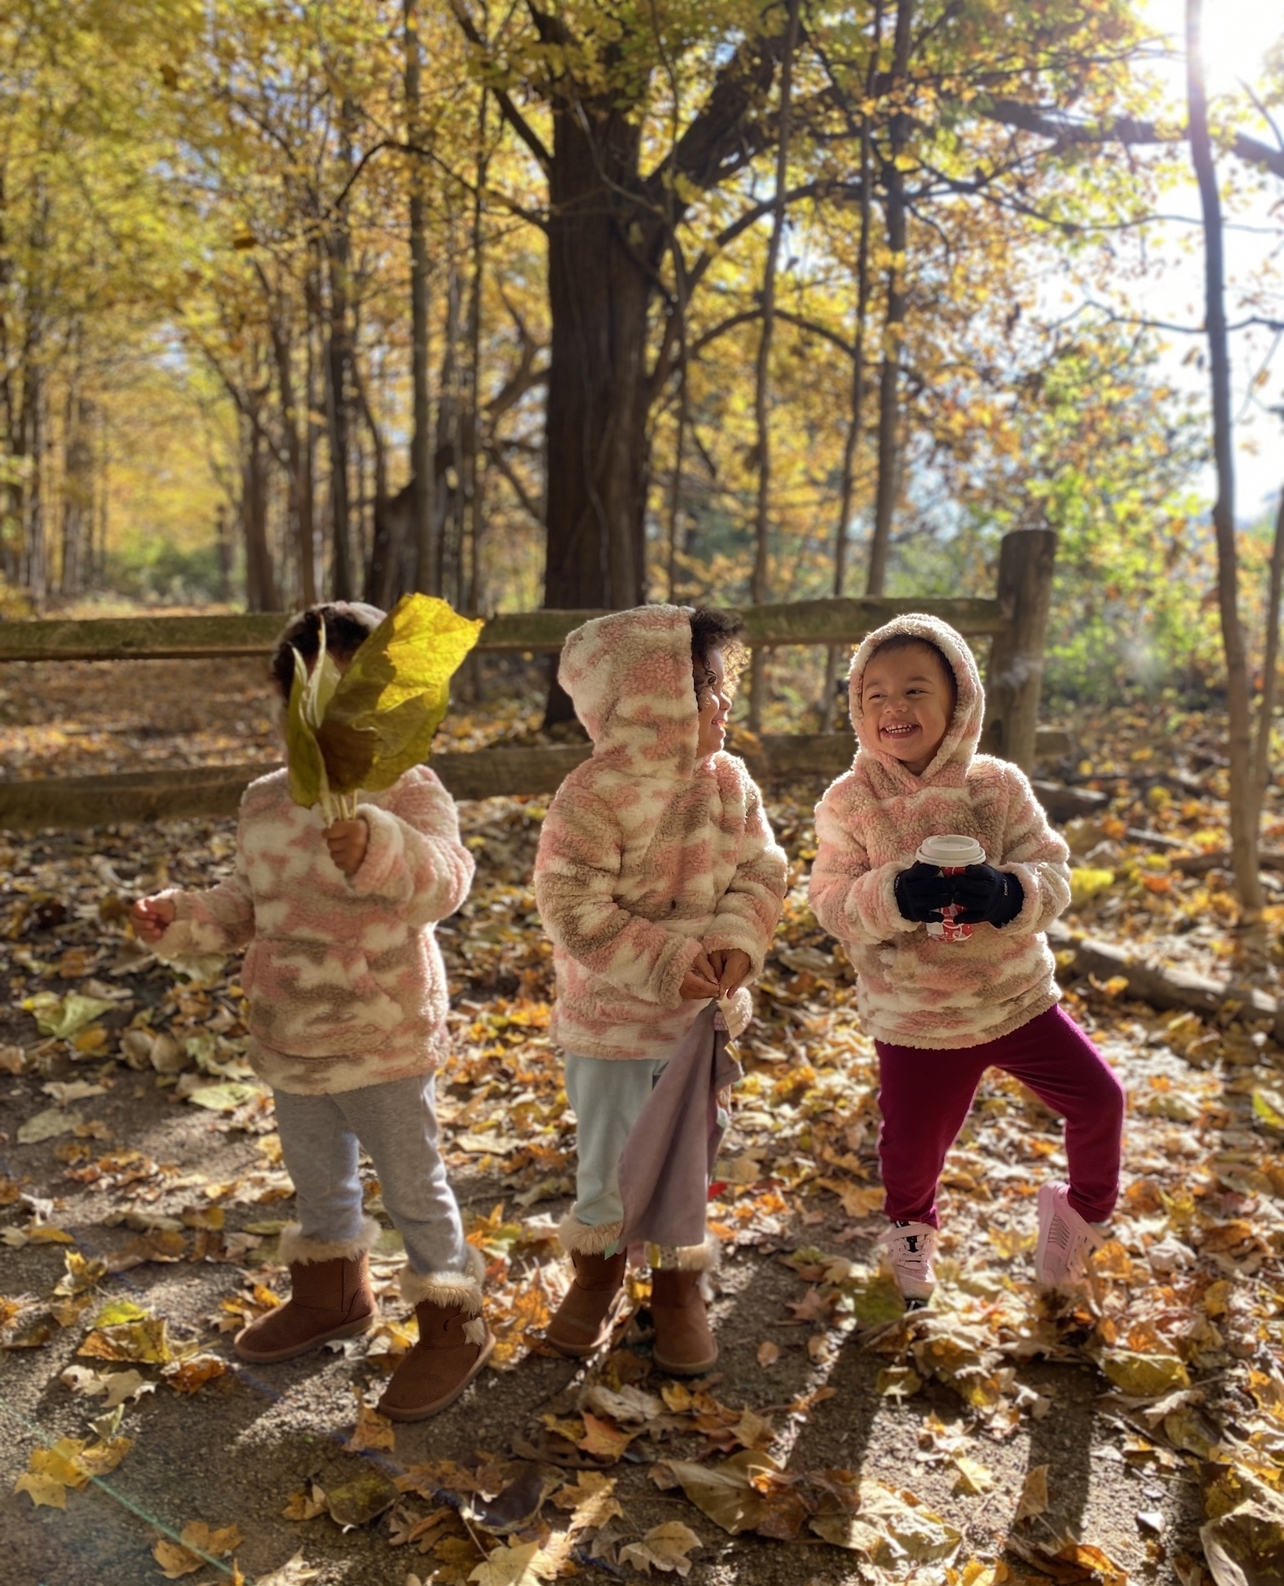 Spend November Exploring our Metro Parks with your Preschooler